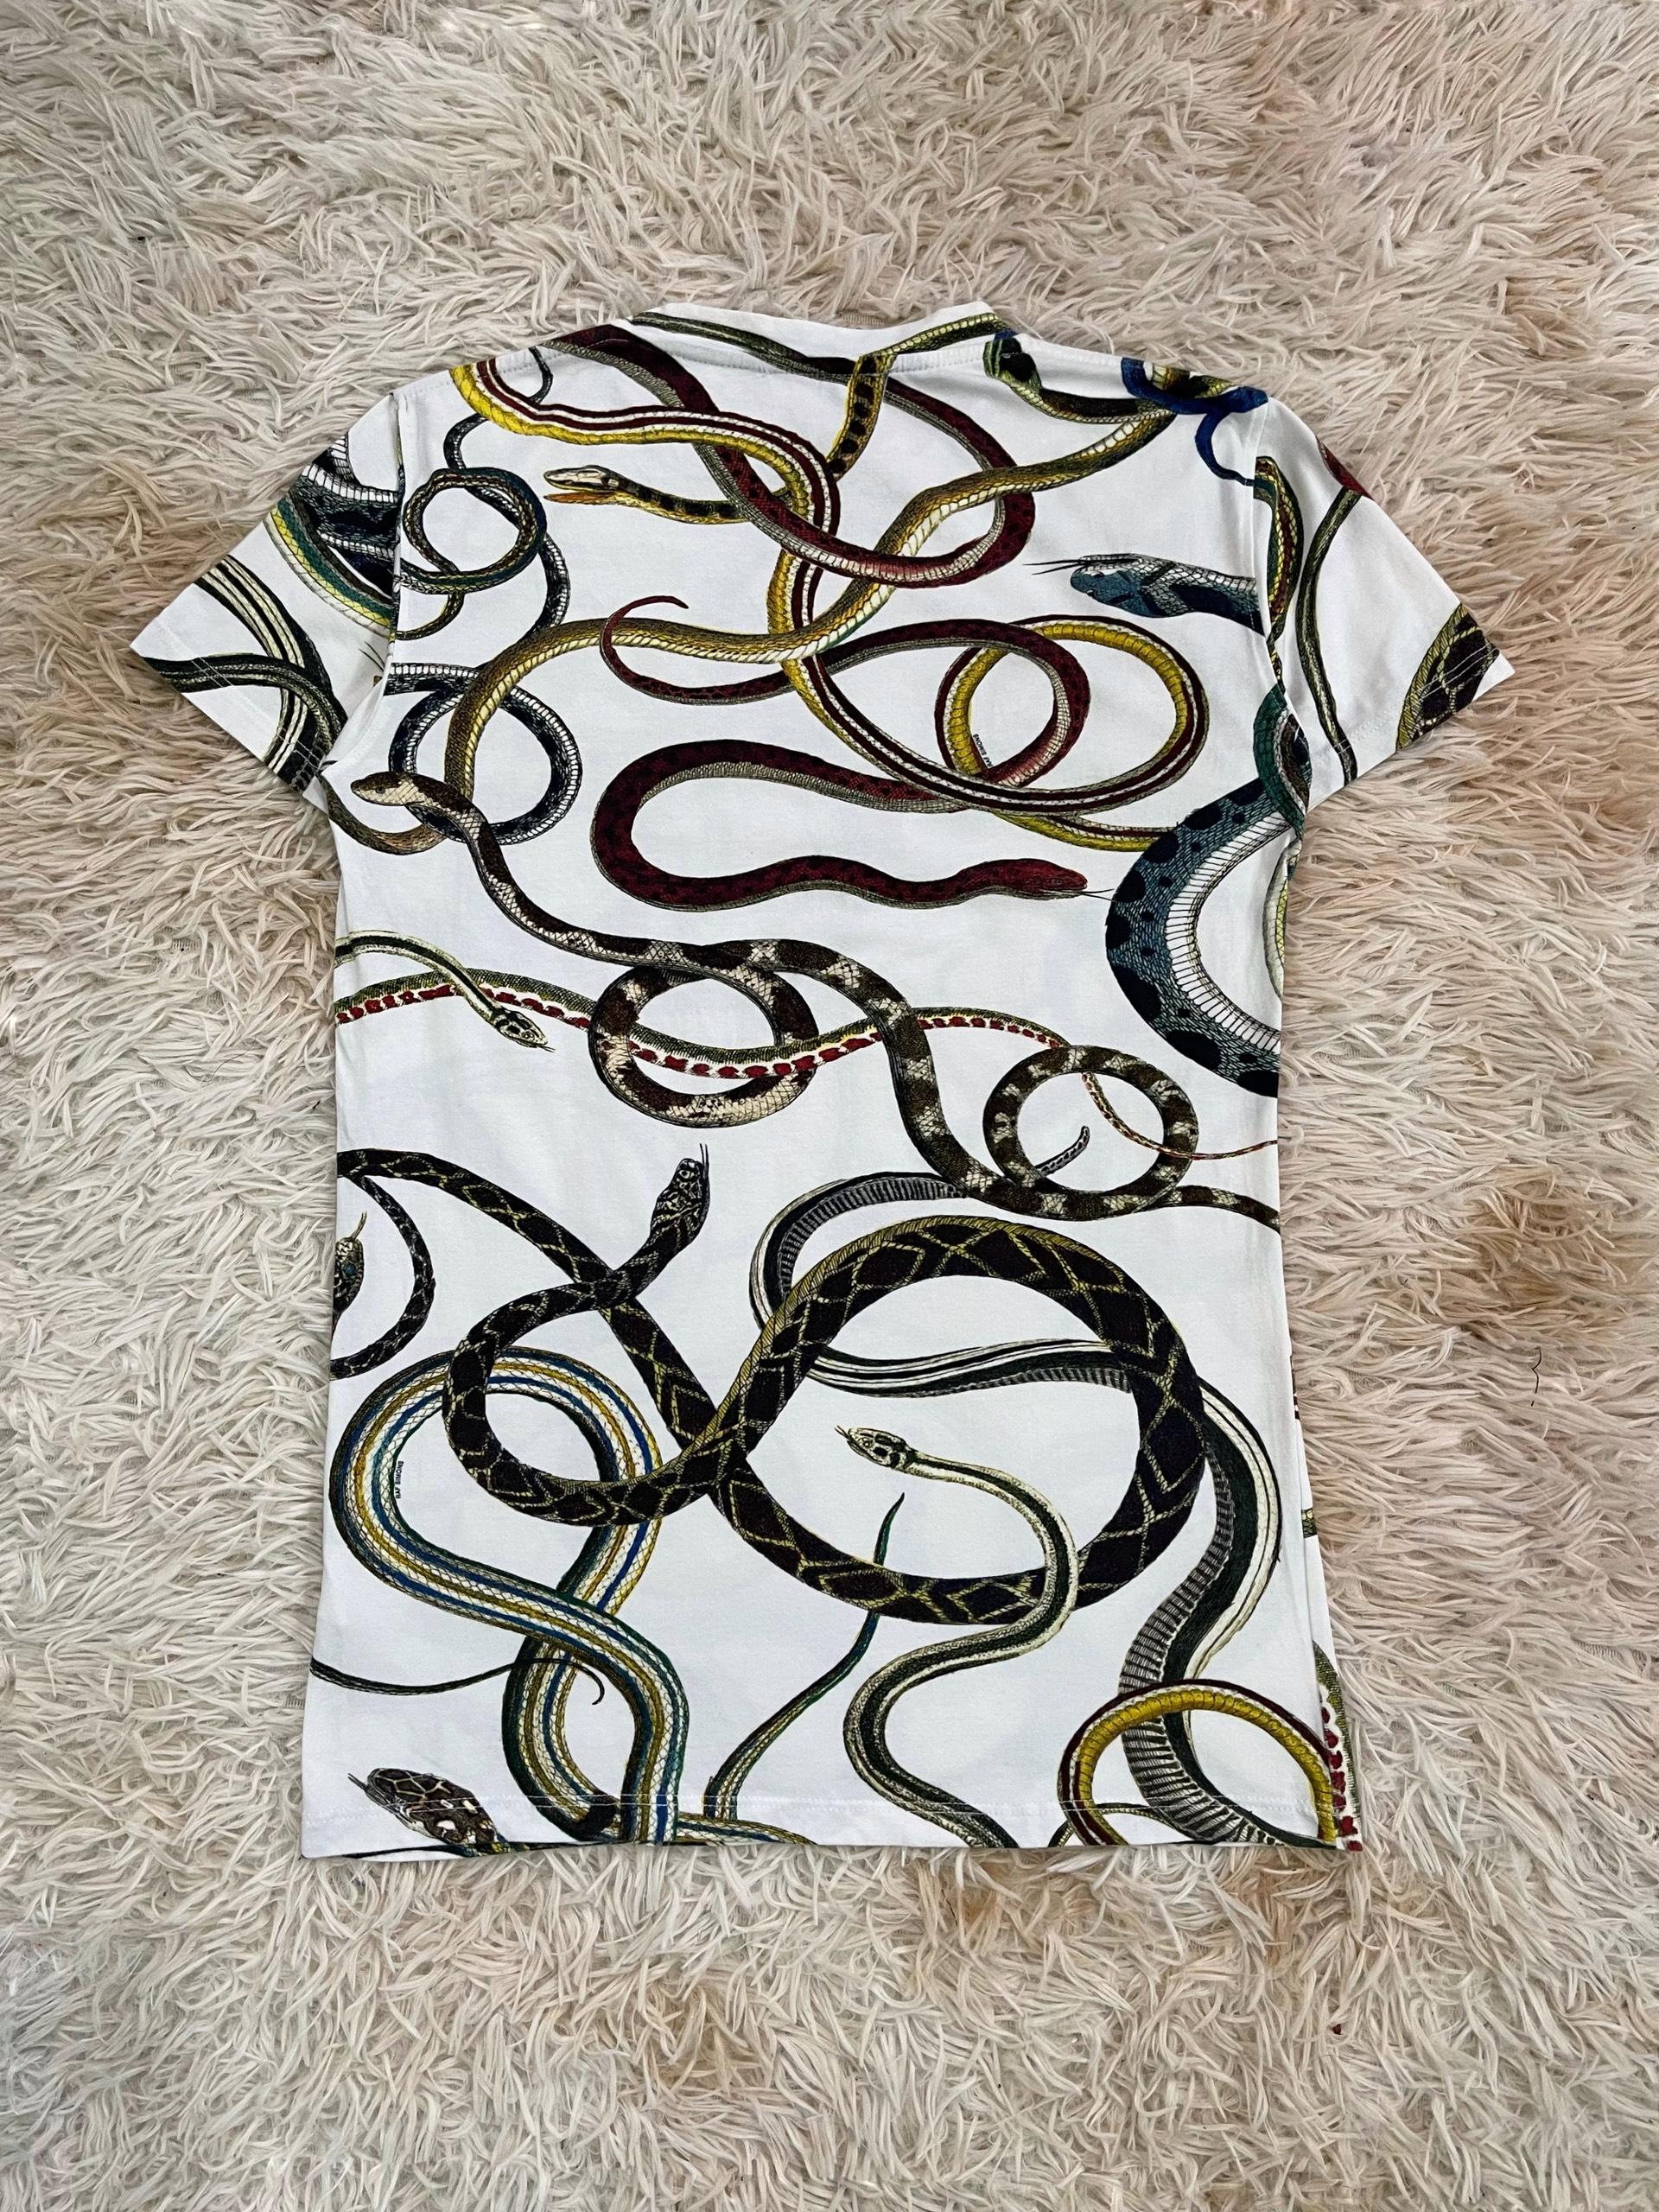 Raf Simons S/S2010 Snakes T-Shirt In Excellent Condition For Sale In Tương Mai Ward, Hoang Mai District